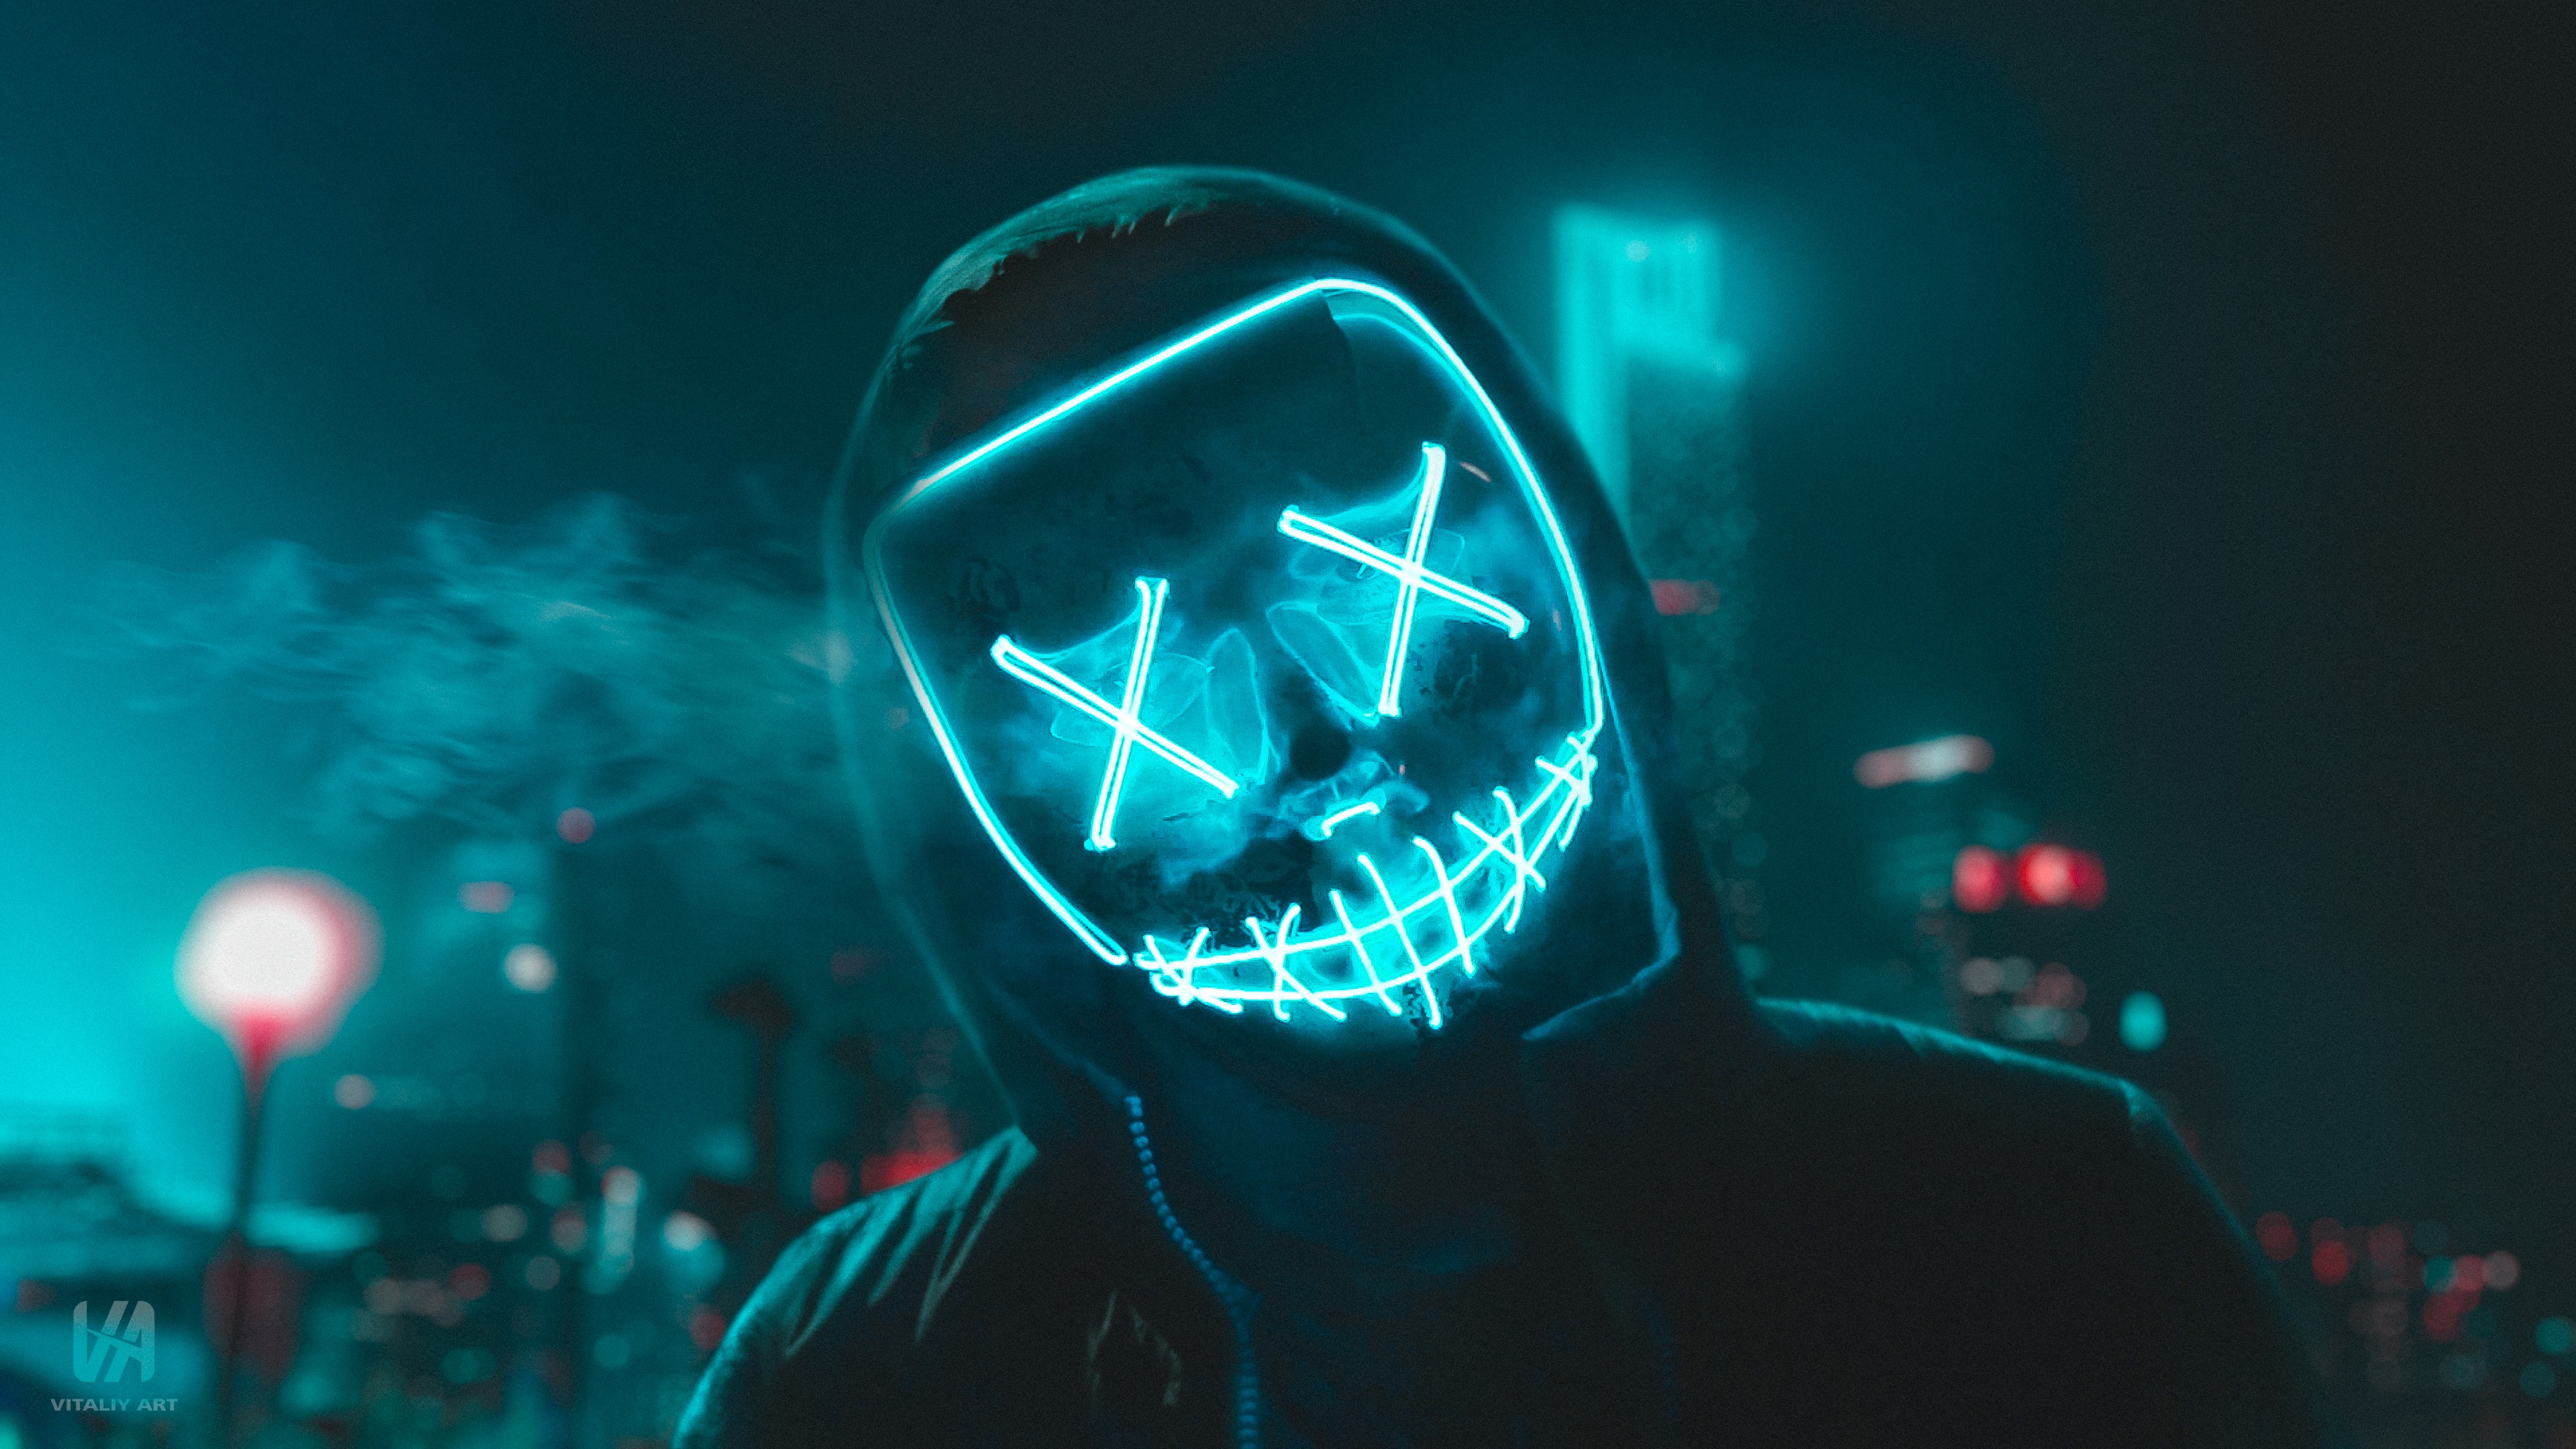 LED Mask 4K Wallpapers | HD Wallpapers